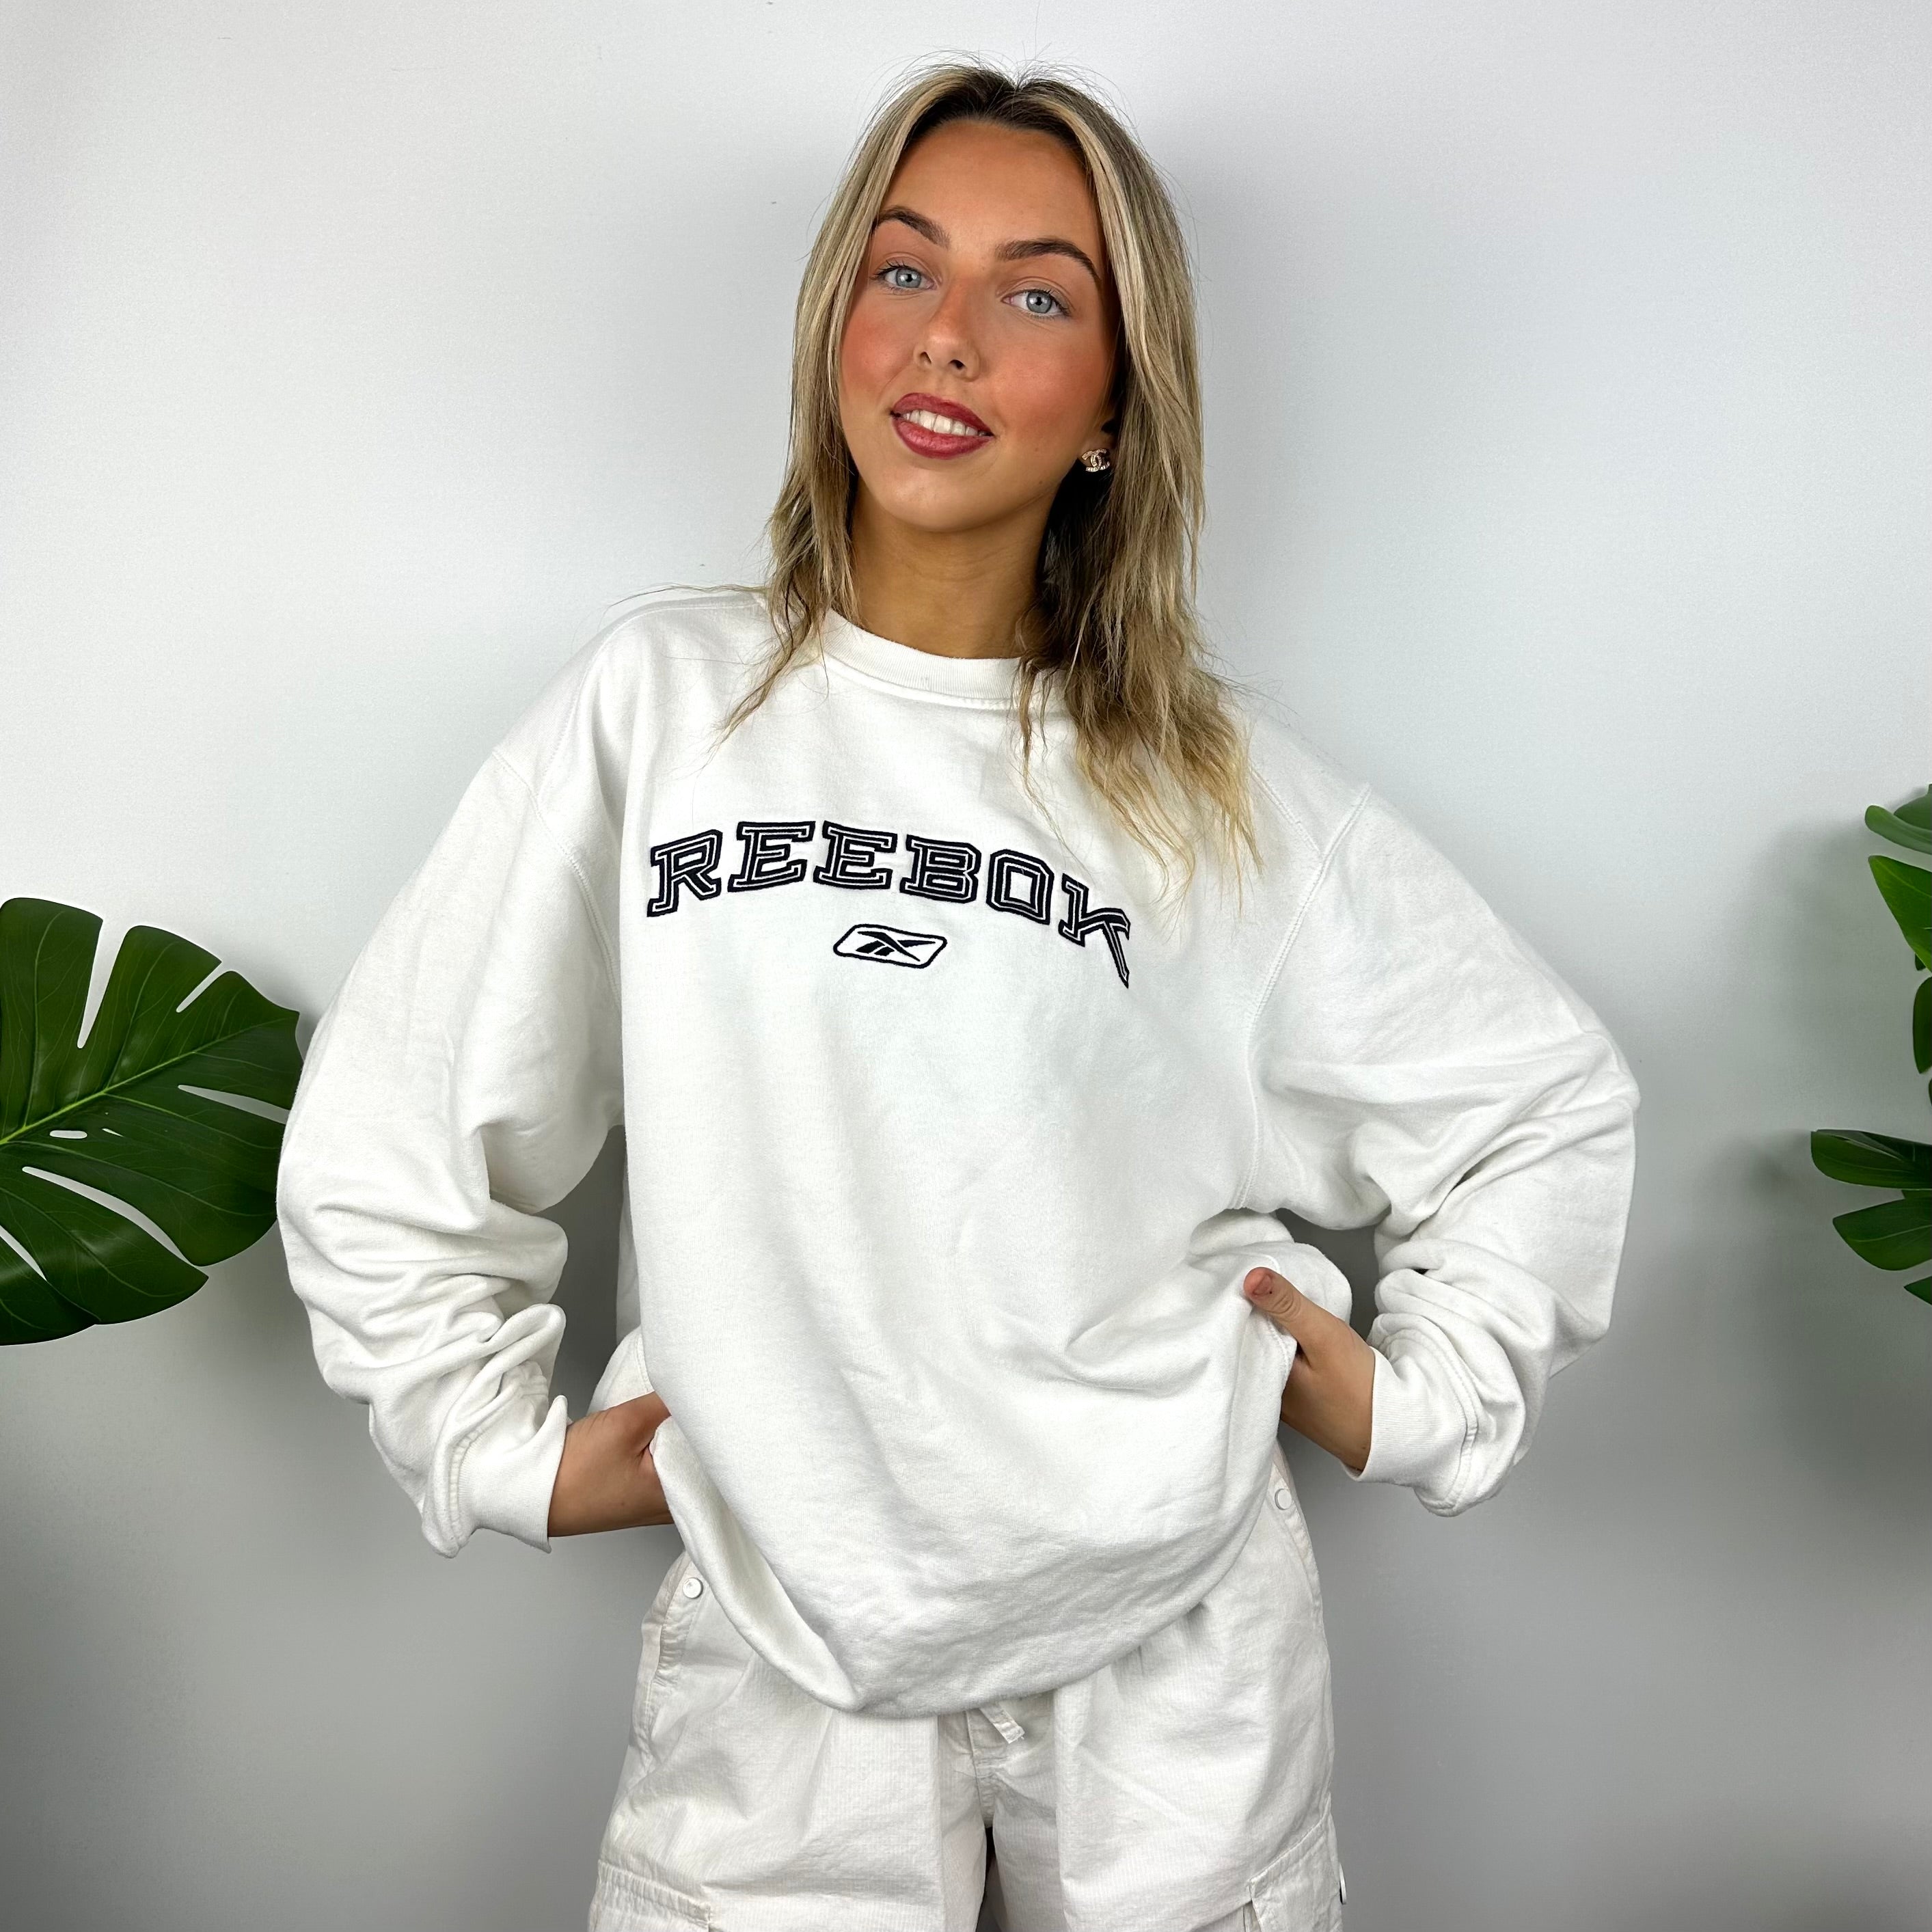 Reebok White Embroidered Spell Out Sweatshirt (L)